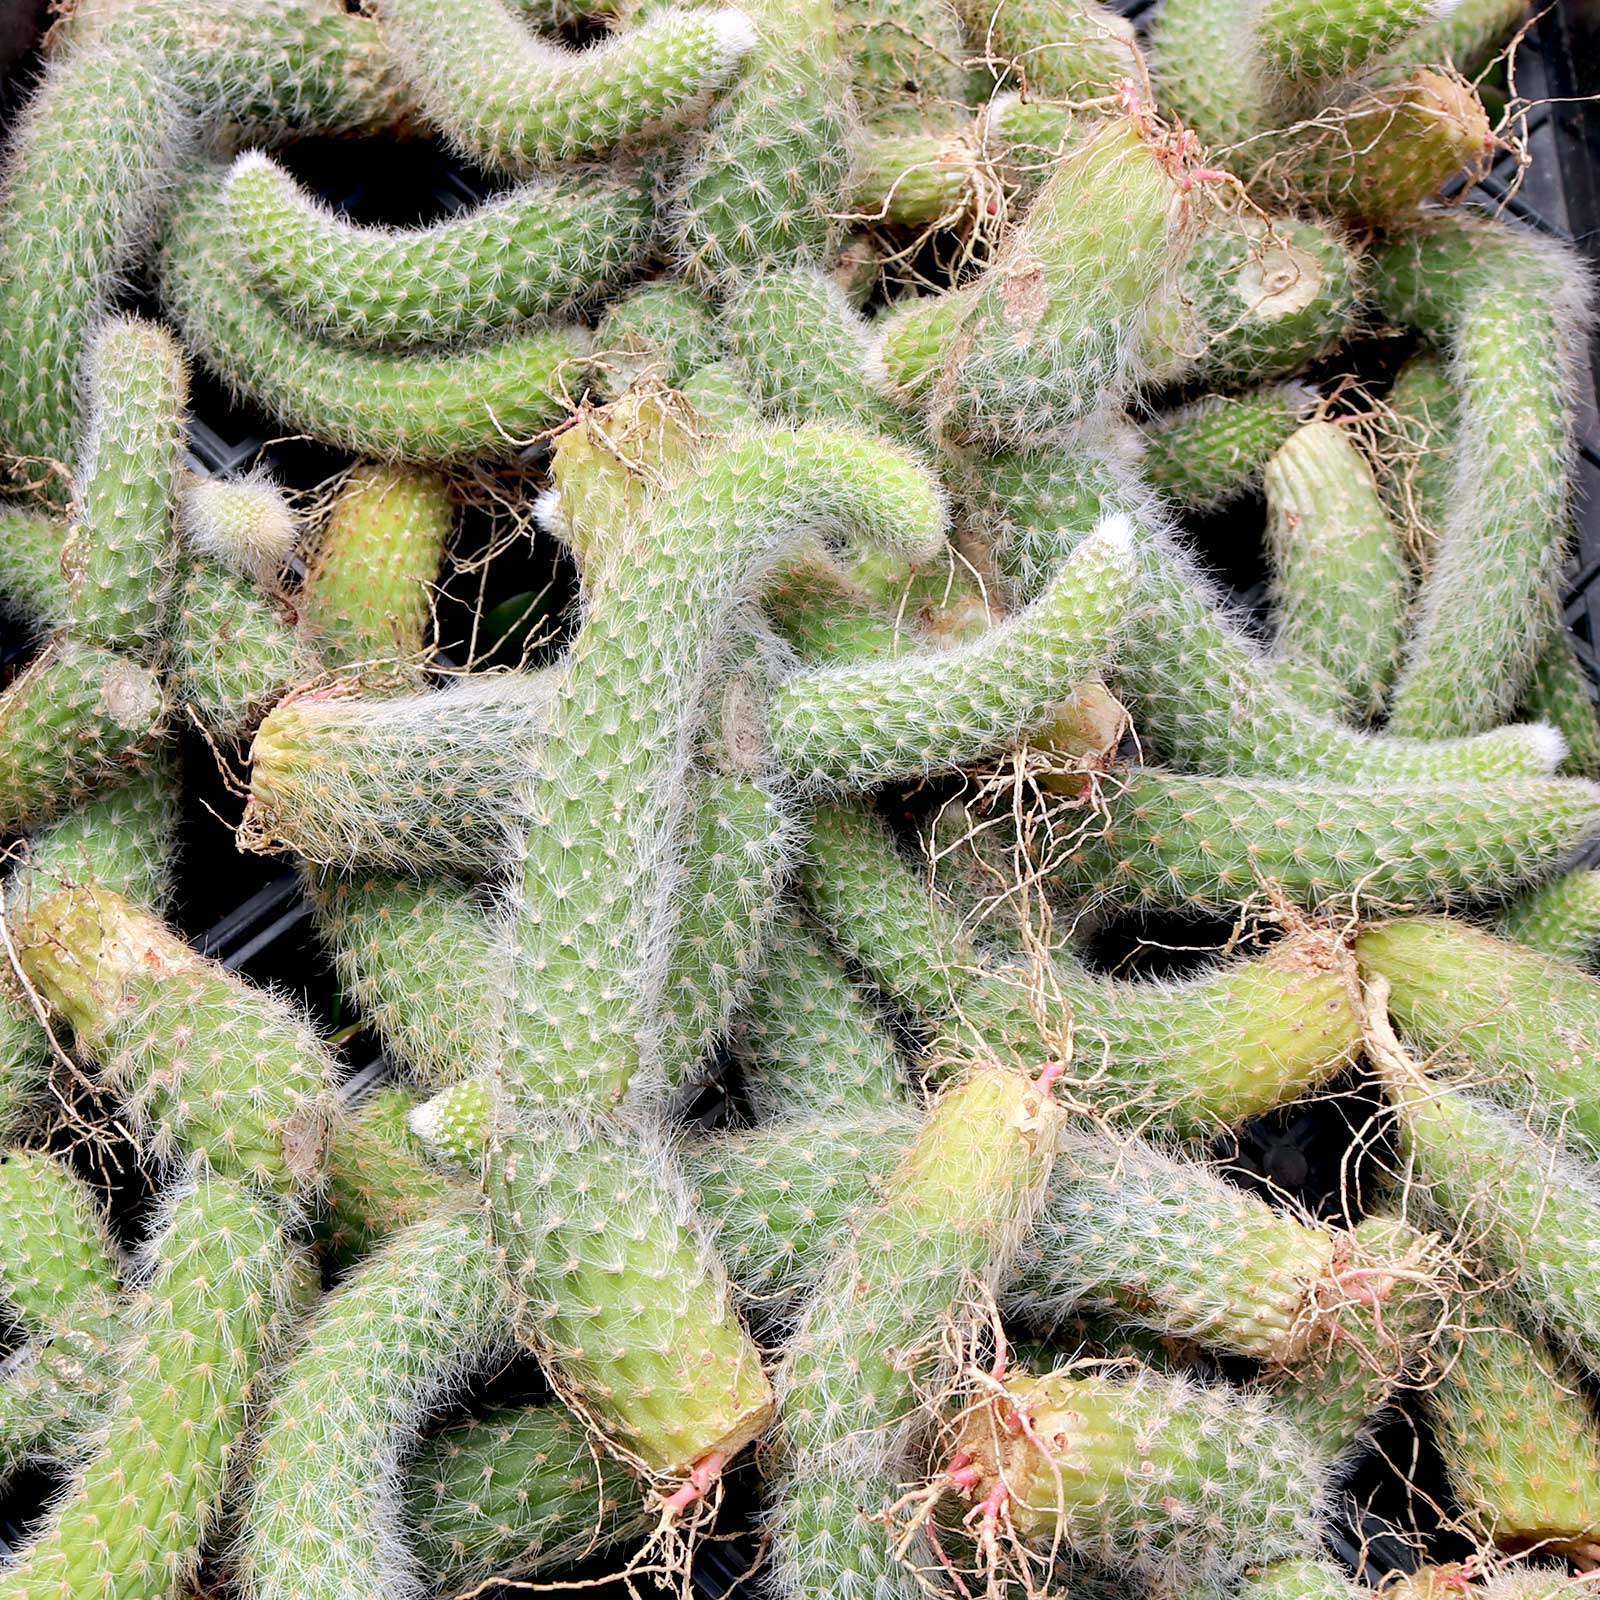 Cleistocactus winteri ssp. colademononis - Monkey Tail Cactus [bare root] Questions & Answers